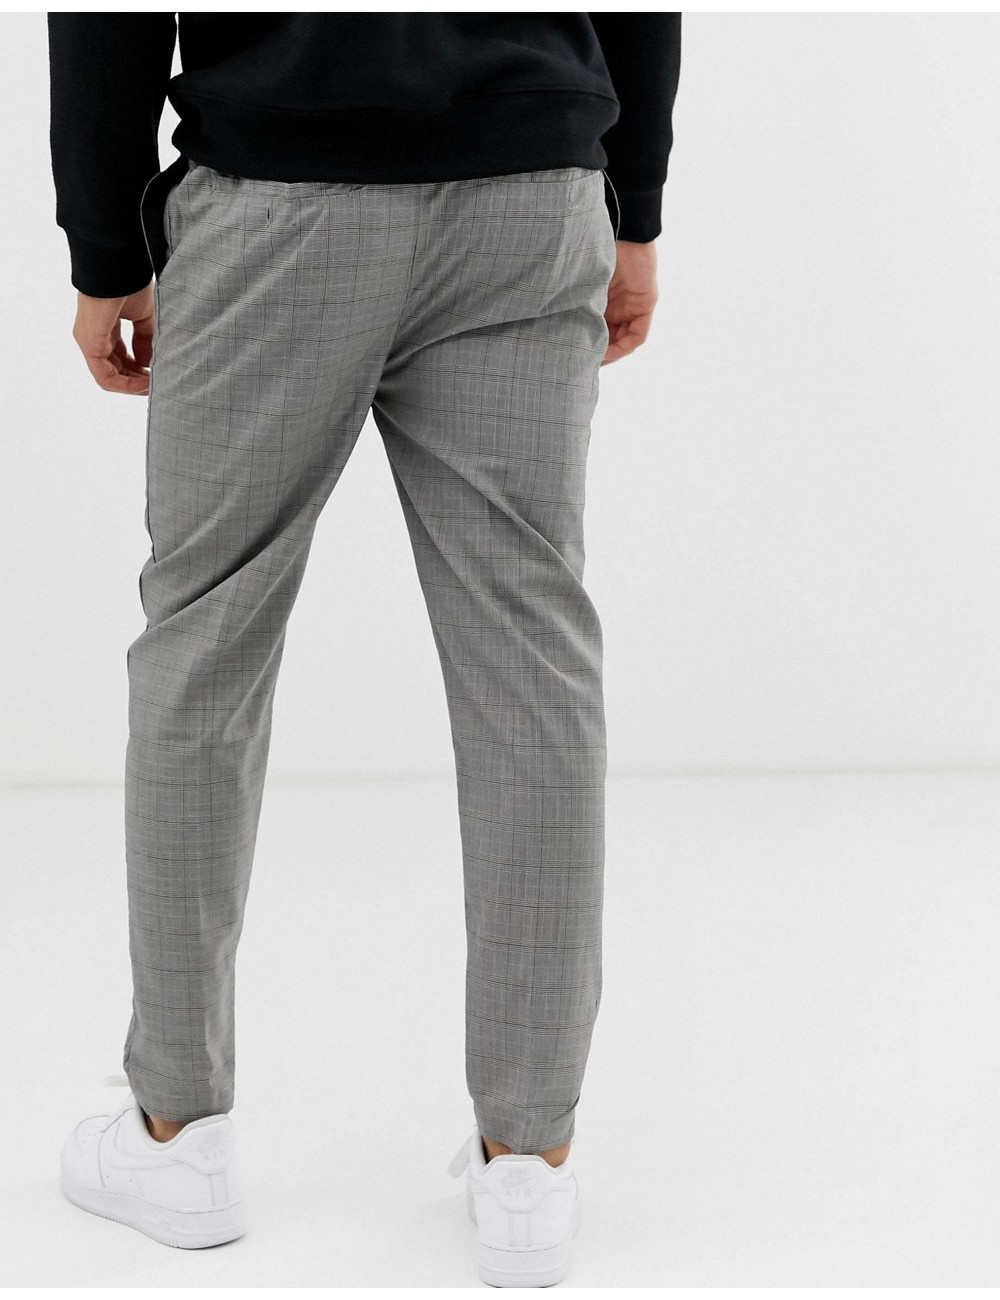 Bellfield checked trousers